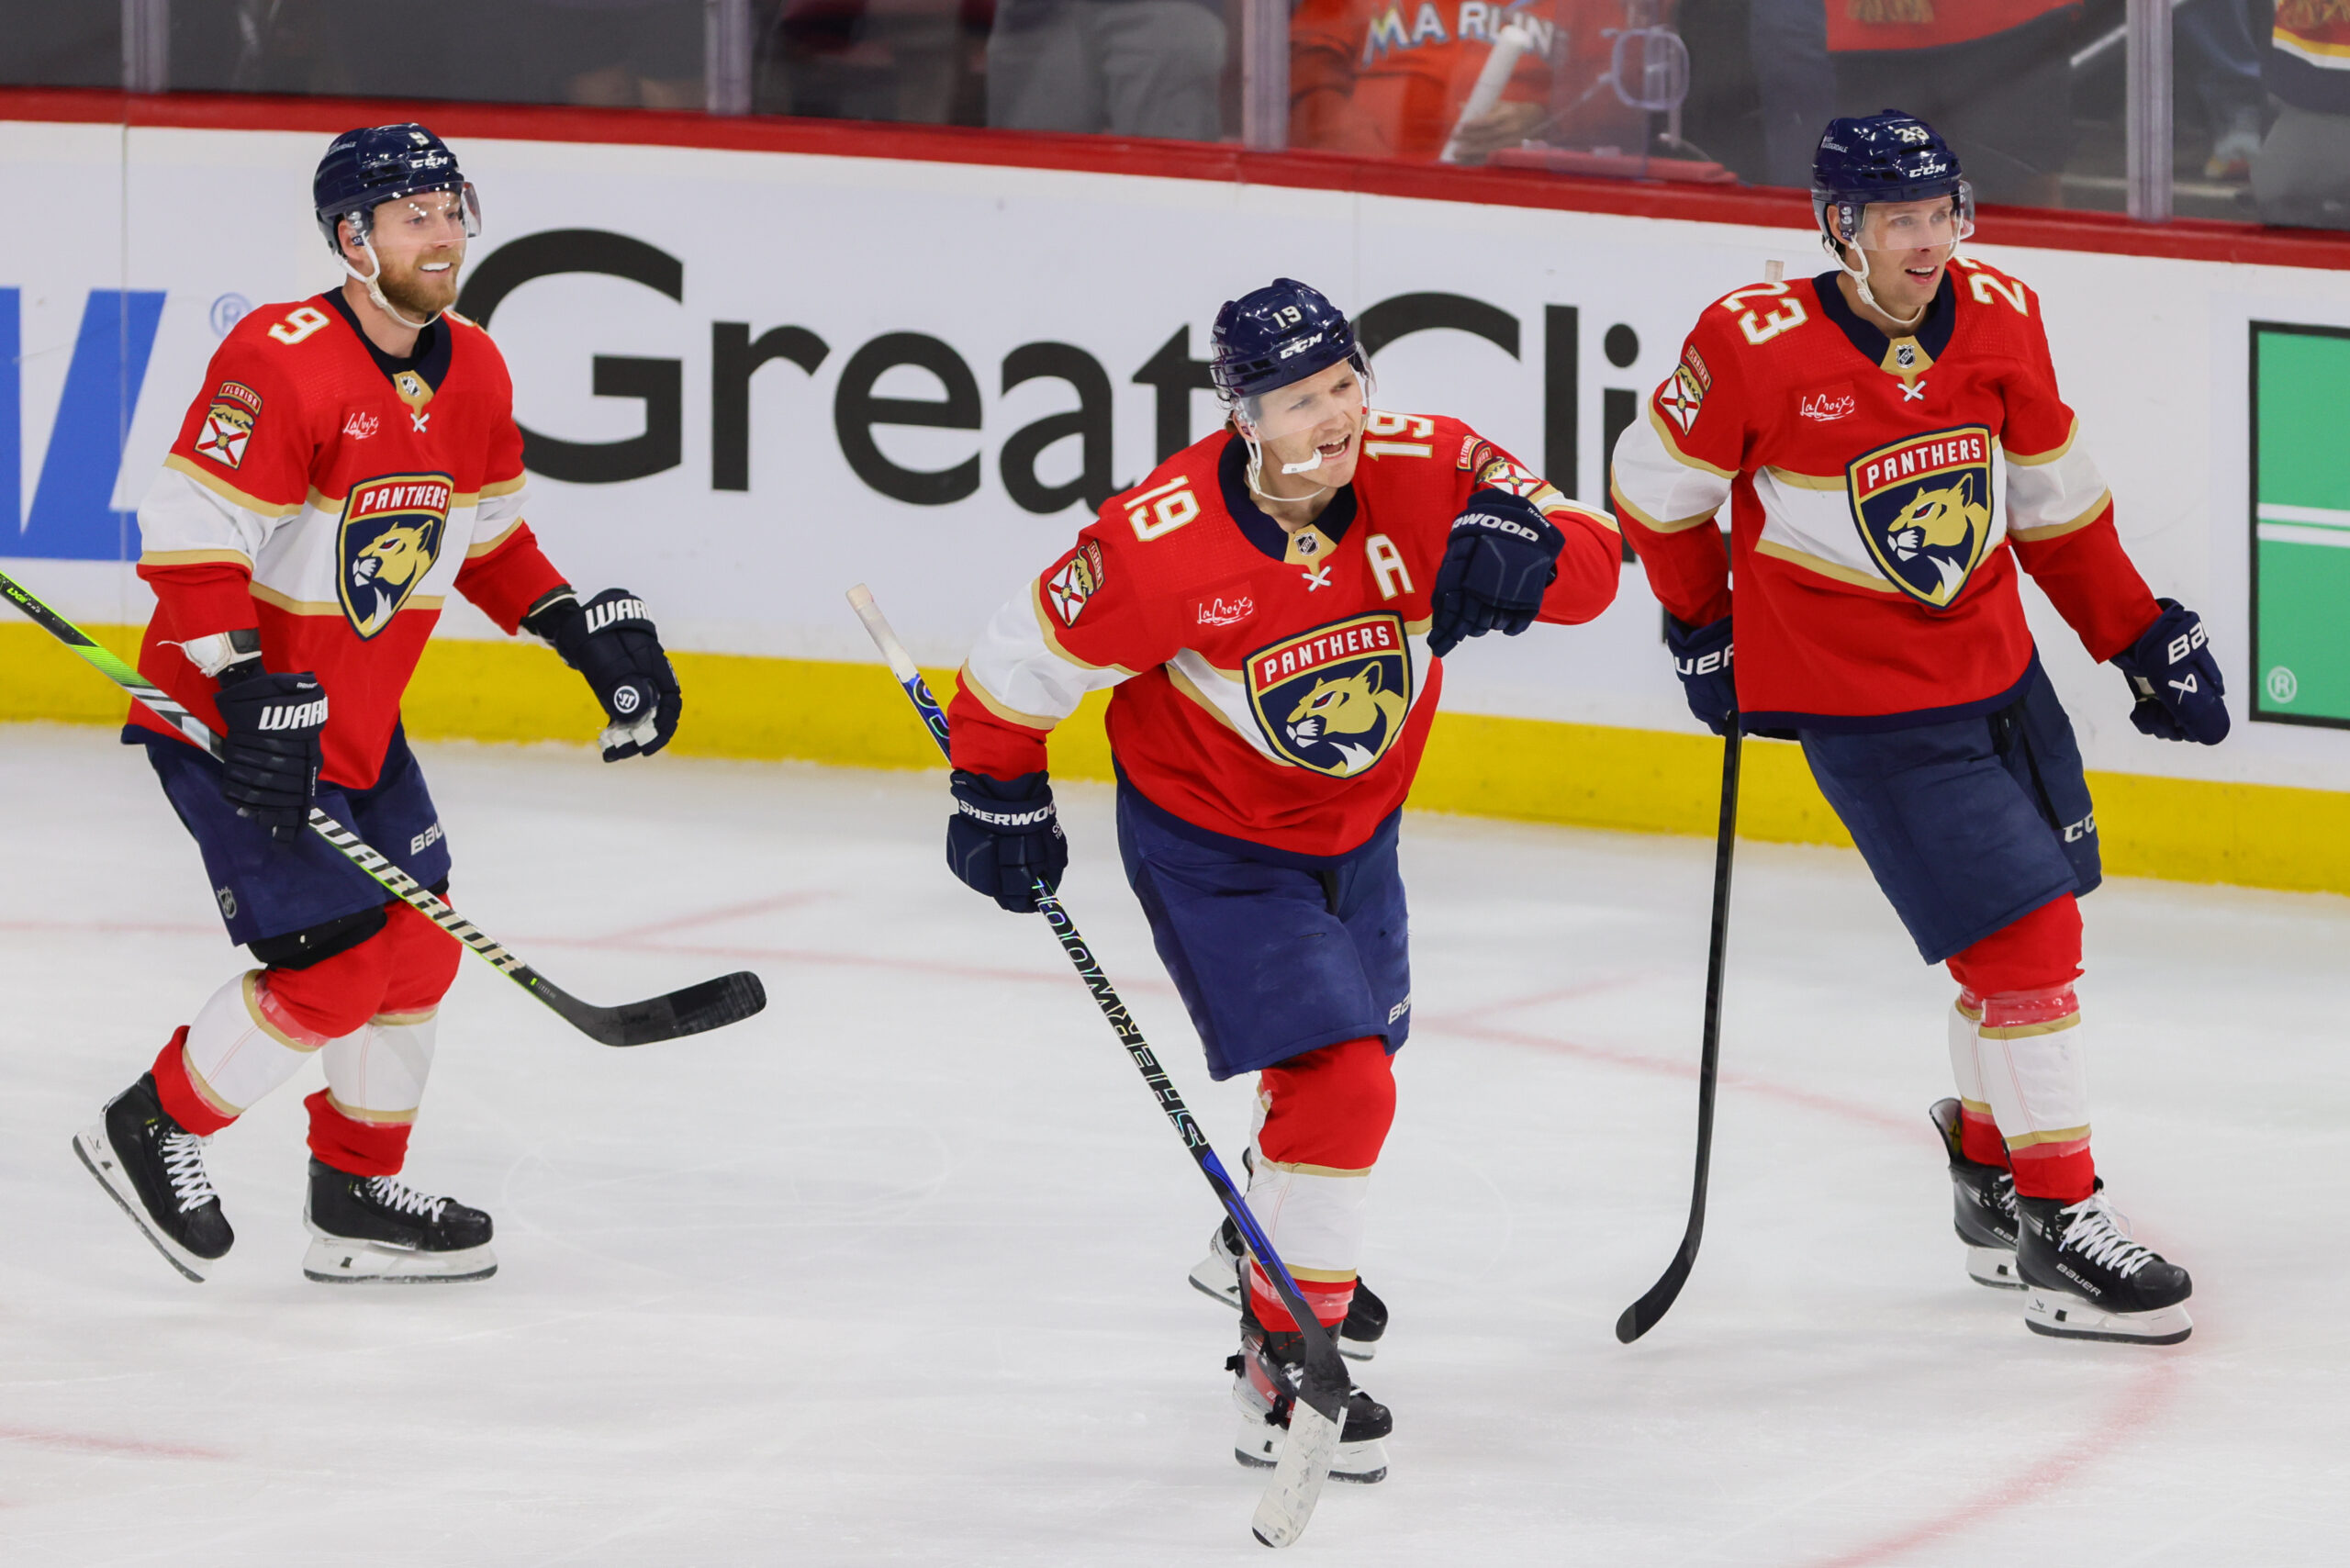 The Panthers Will Be Without Centre Sam Bennett Because of Upper-Body Injury